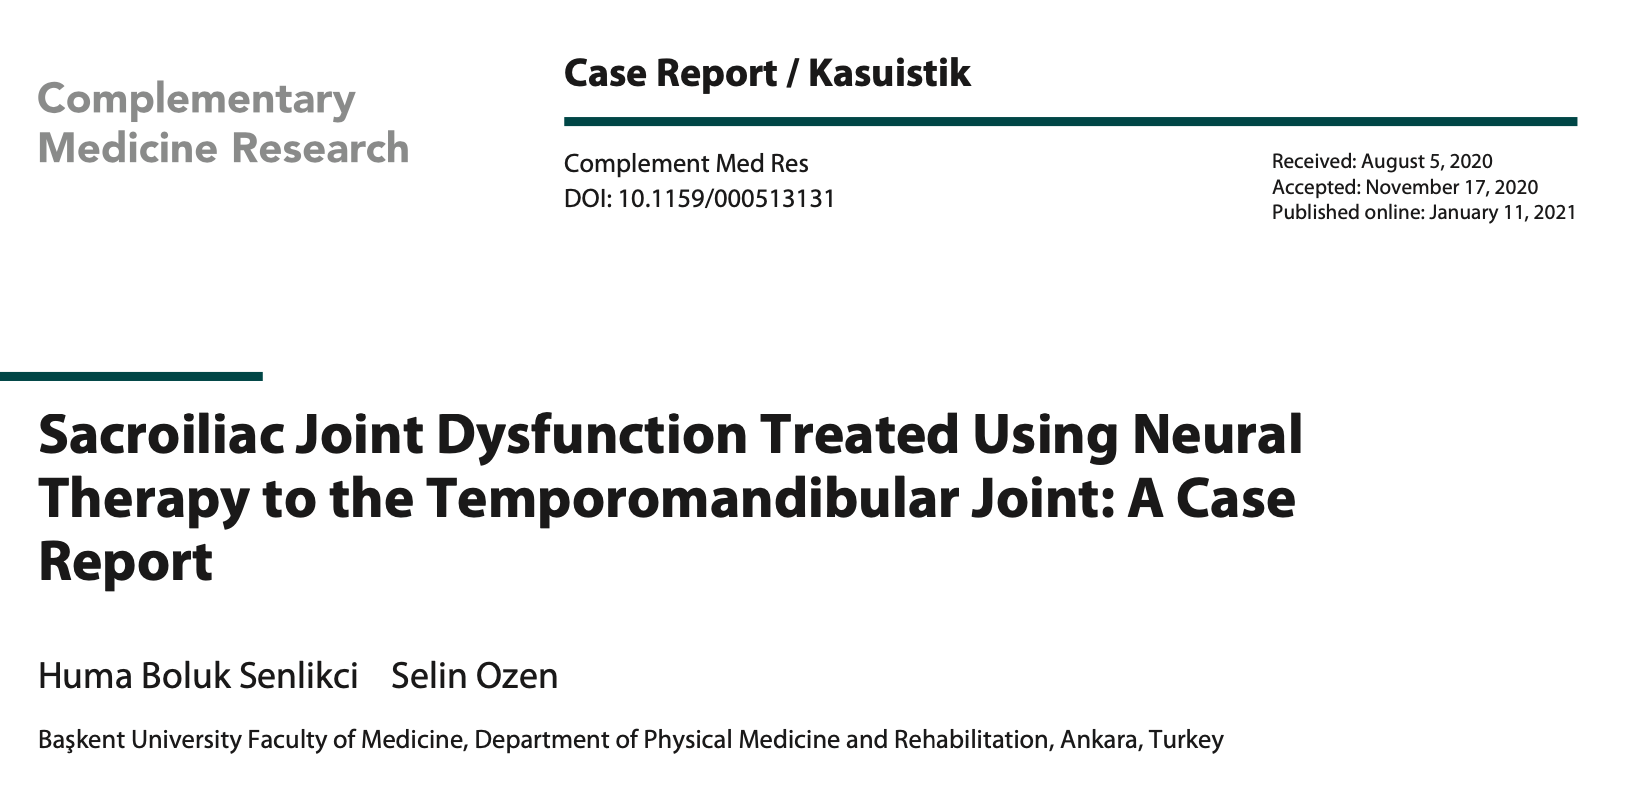 NT AND SACROILIAC JOINT DYSFUNCTION